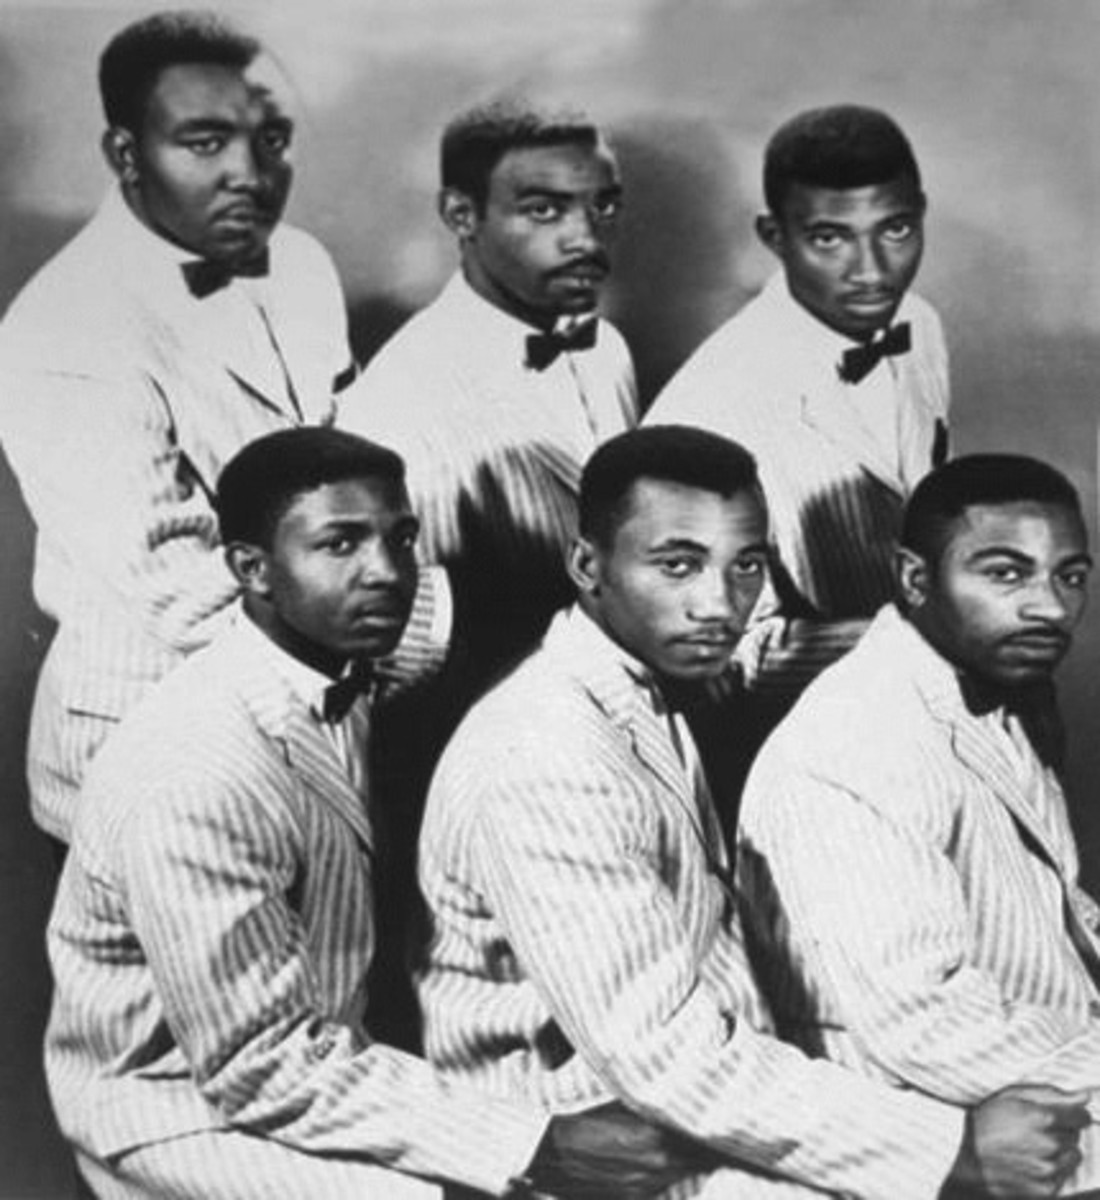 The 1957 lineup of the Gladiolas was (clockwise from top left): Willie Jones, Norman Wade, William Massey, Mac Badskins, Maurice Williams and Earl Gainey. Photo courtesy Maurice Williams